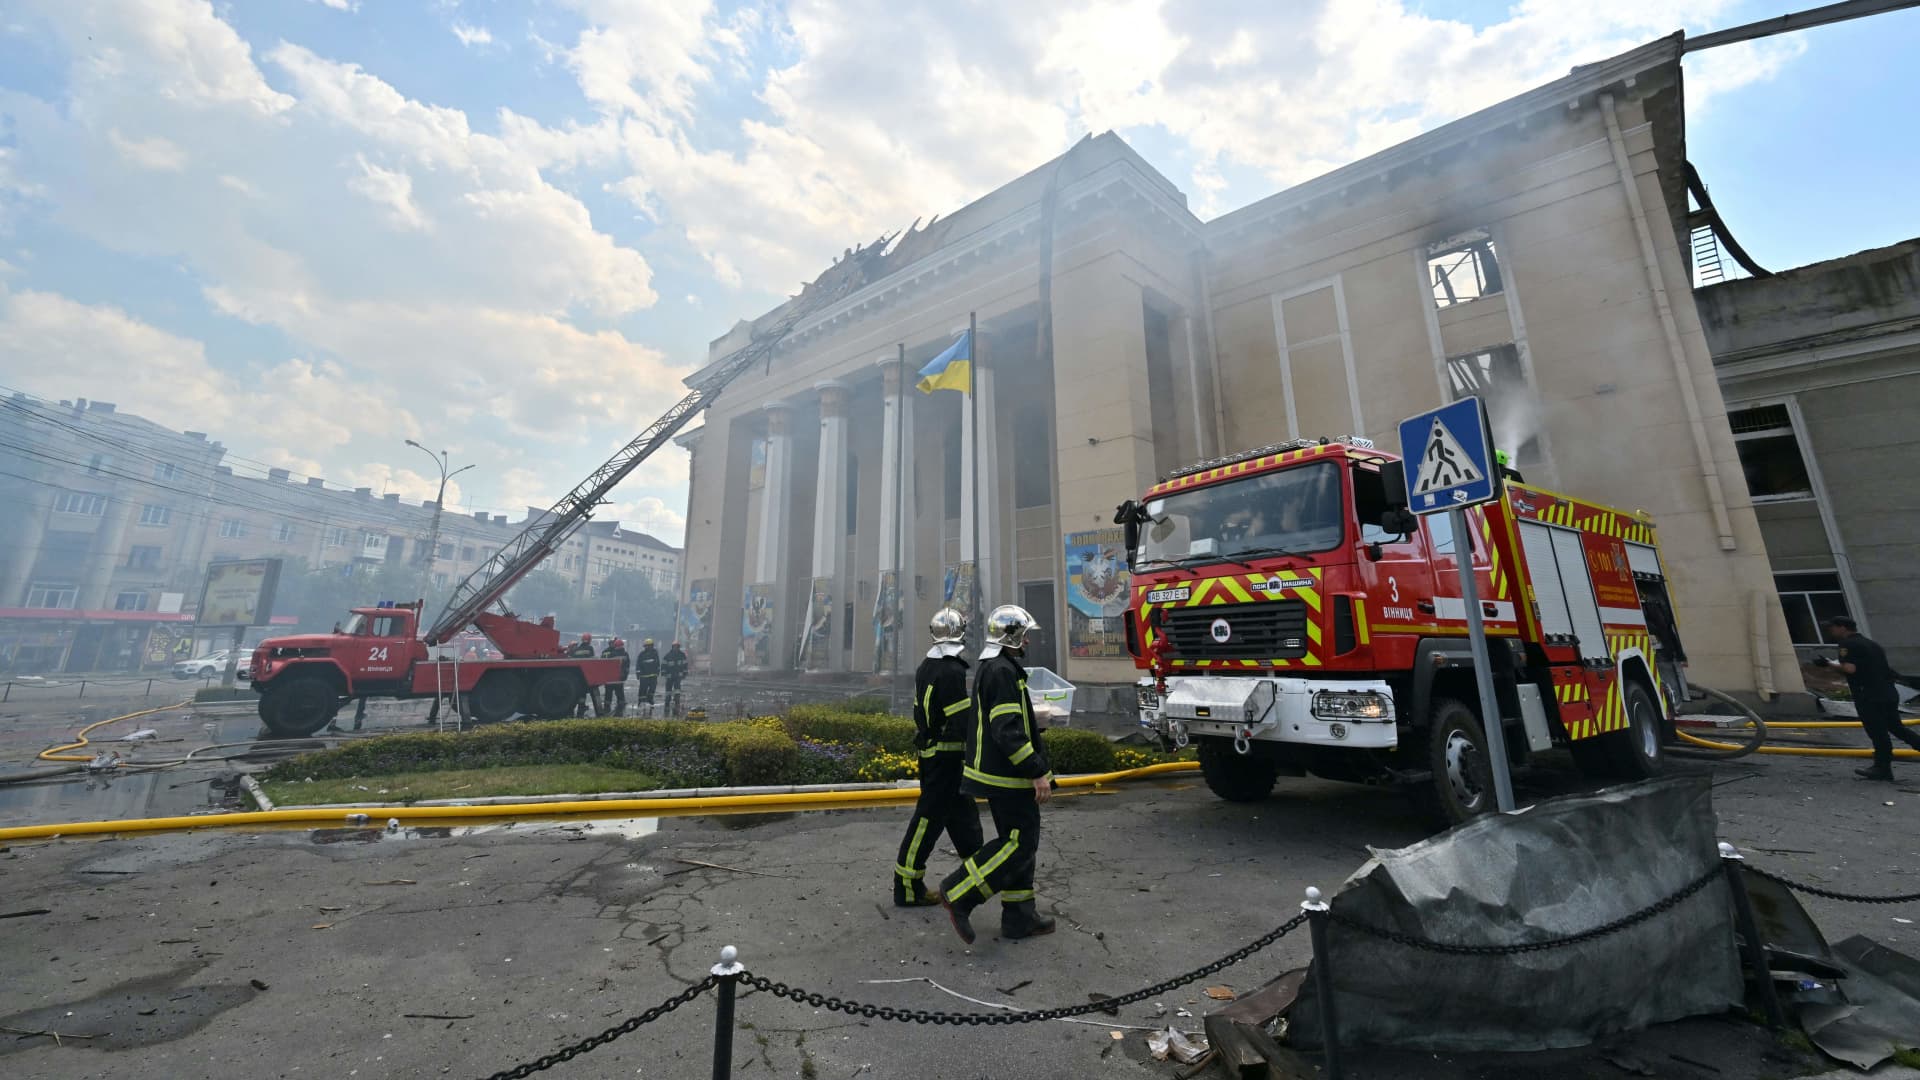 Firefighters extinguish fire following a Russian airstrike in the city of Vinnytsia, west-central Ukraine on July 14, 2022.